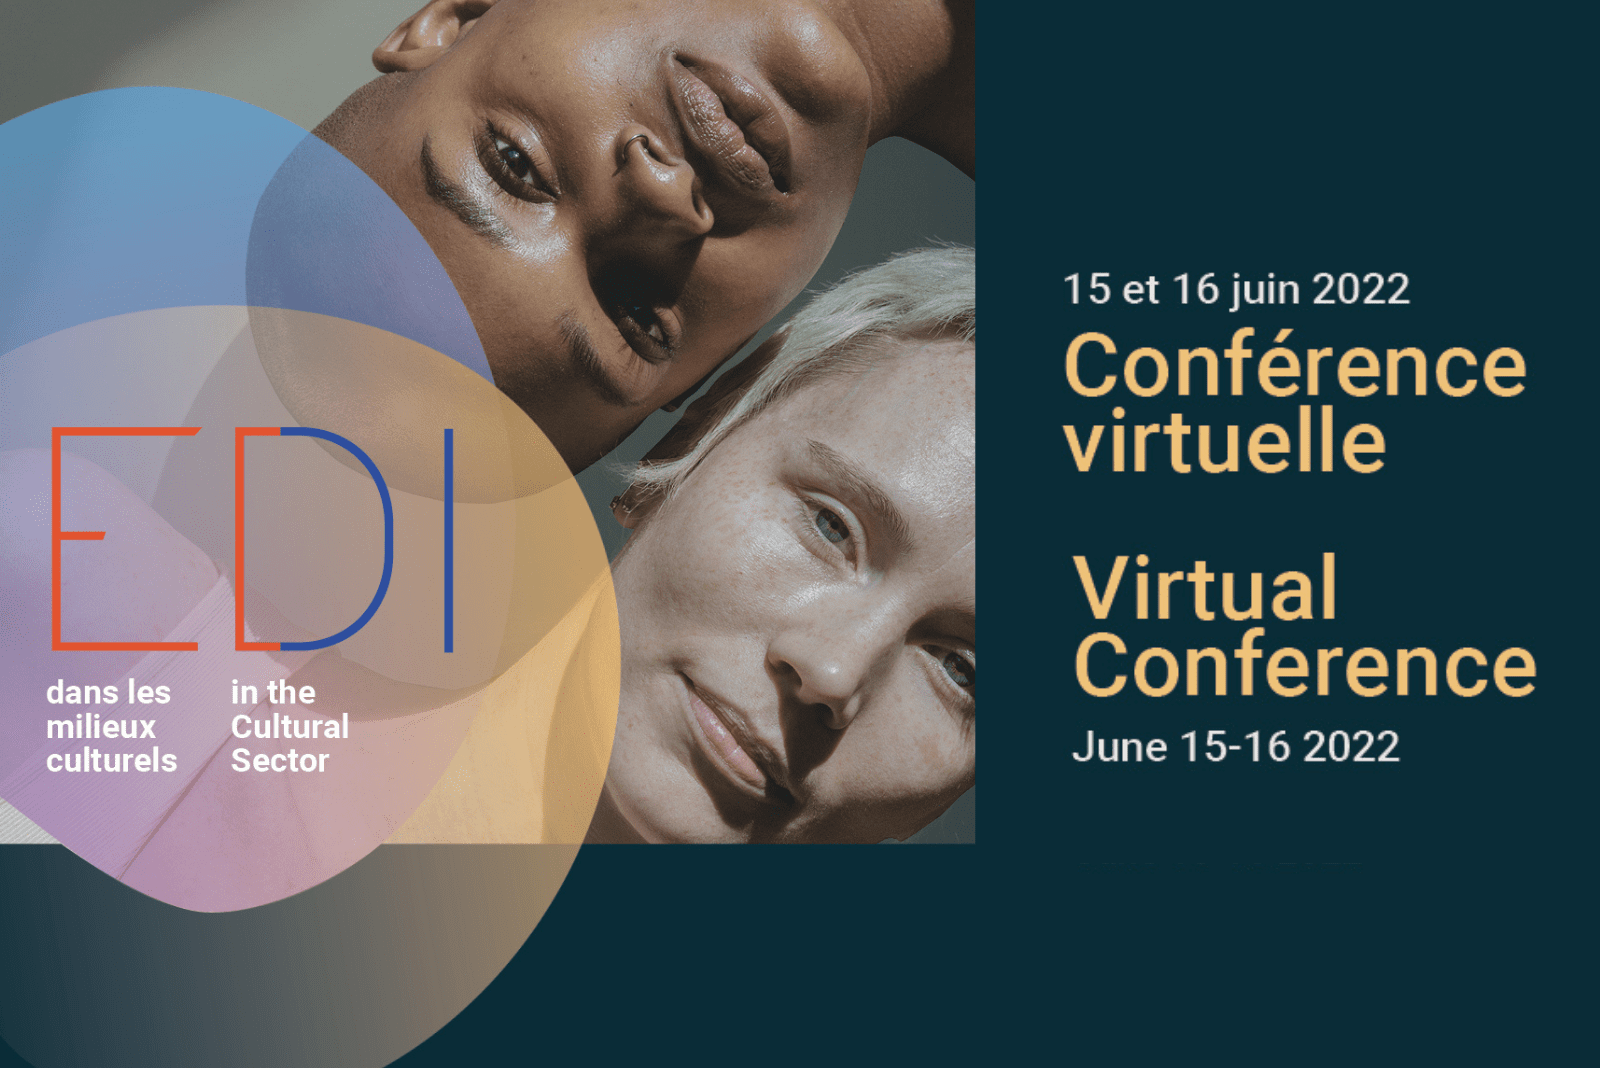 Photo of a Black person with short black hair and a nose ring beside a white person with short blonde hair. Both are smiling slightly. Text reads "EDI in the Cultural Sector"/"EDI dans les milieux culturals". Virtual Conference June 15-16 2022. Registration Now Open!